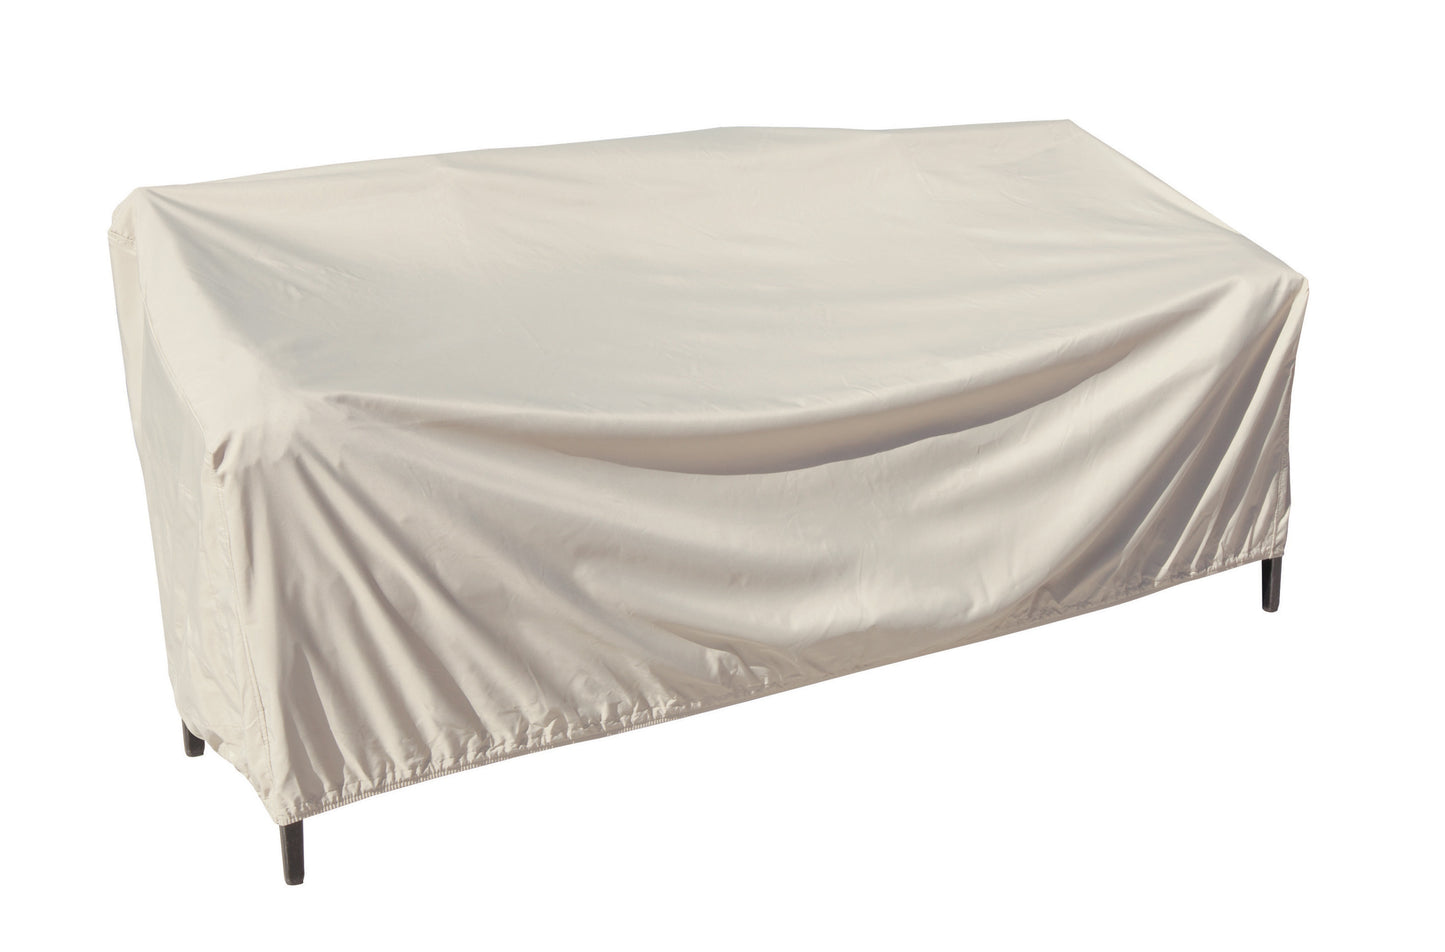 CP743 X-Large Sofa Cover